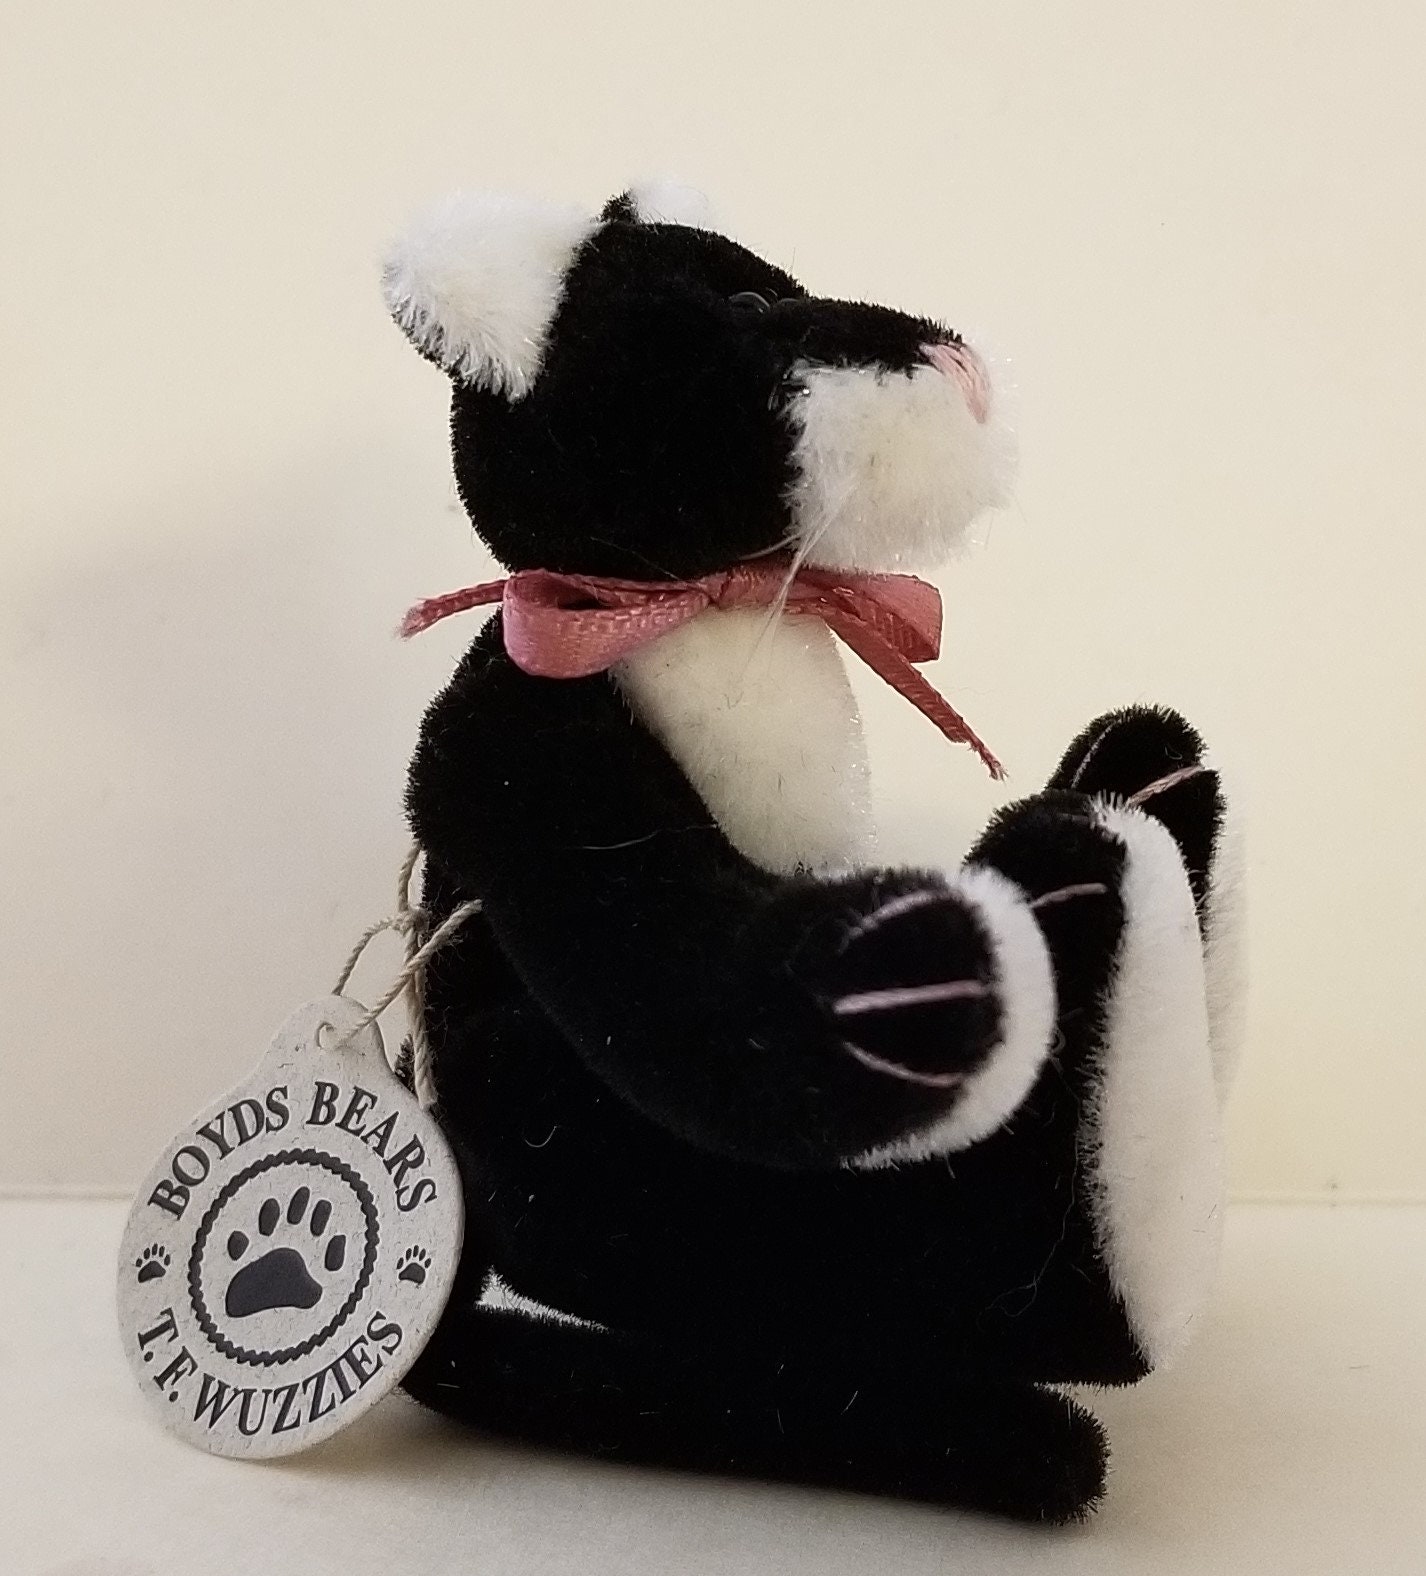 Details about   Boyds Bears Wuzzies Cat "Tabby F Wuzzie” Black & White Kitty 3.5 Inches New 